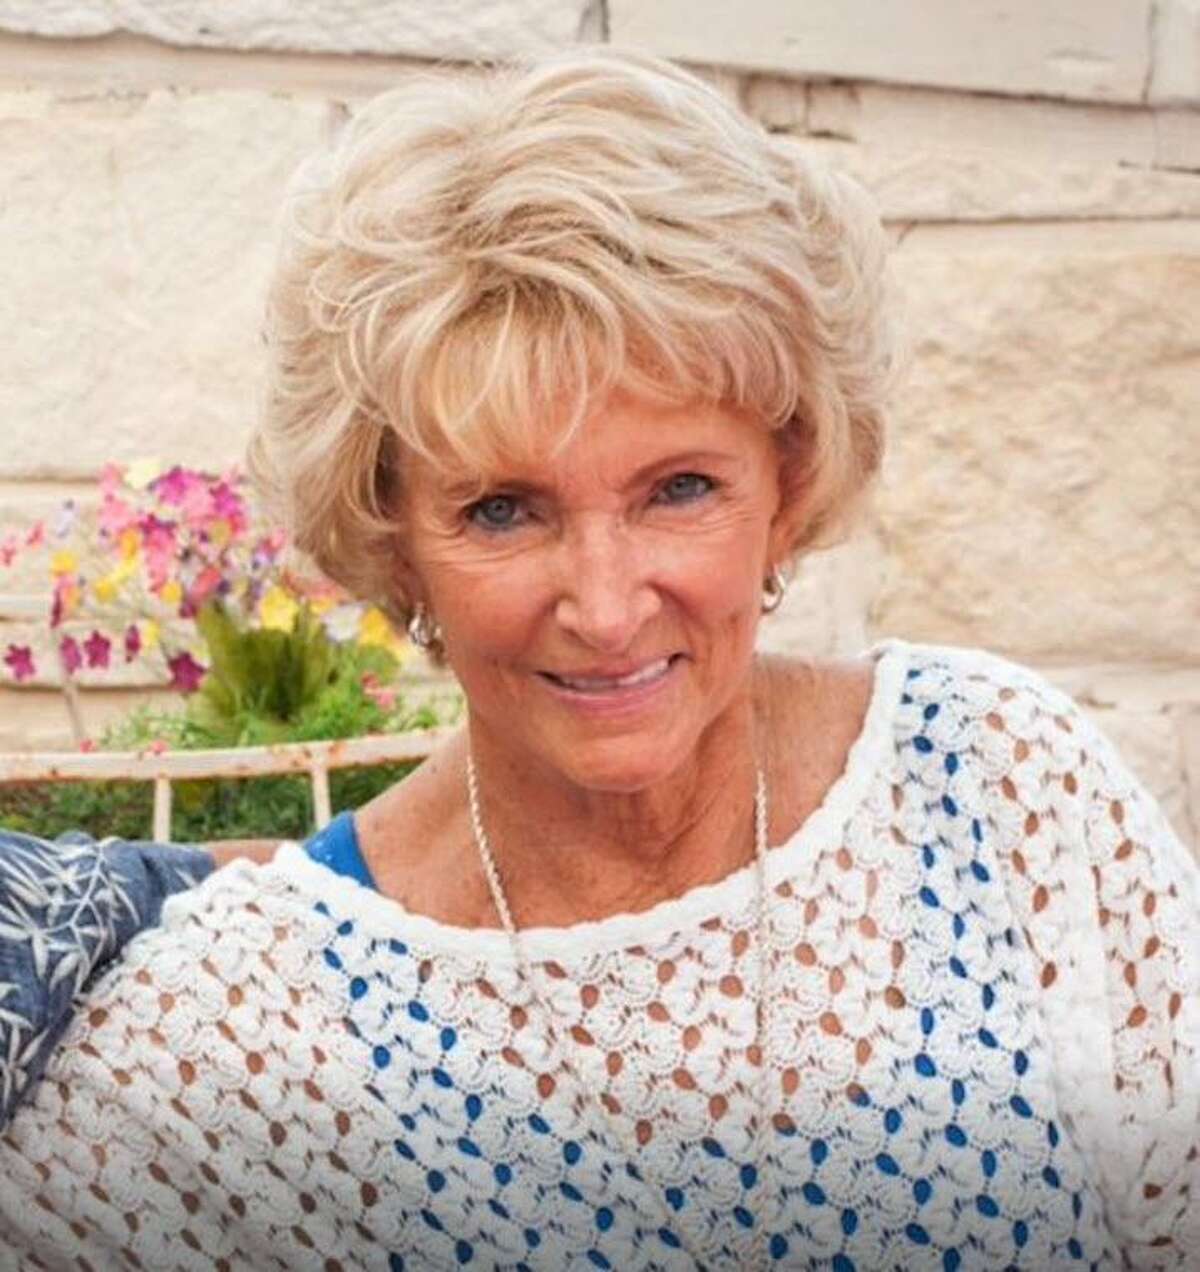 Betty Thomas, an 83-year-old Irving, Texas resident, was murdered in her home in December 2019 by a cable technician employed by Stamford-based Charter Communications. Last year, a Texas jury ordered Charter to pay damages of more than $7 billion in connection with Thomas’ death. The company subsequently said, in its 2022 annual report, that it had tentatively agreed to settle the case for less than $262 million. 